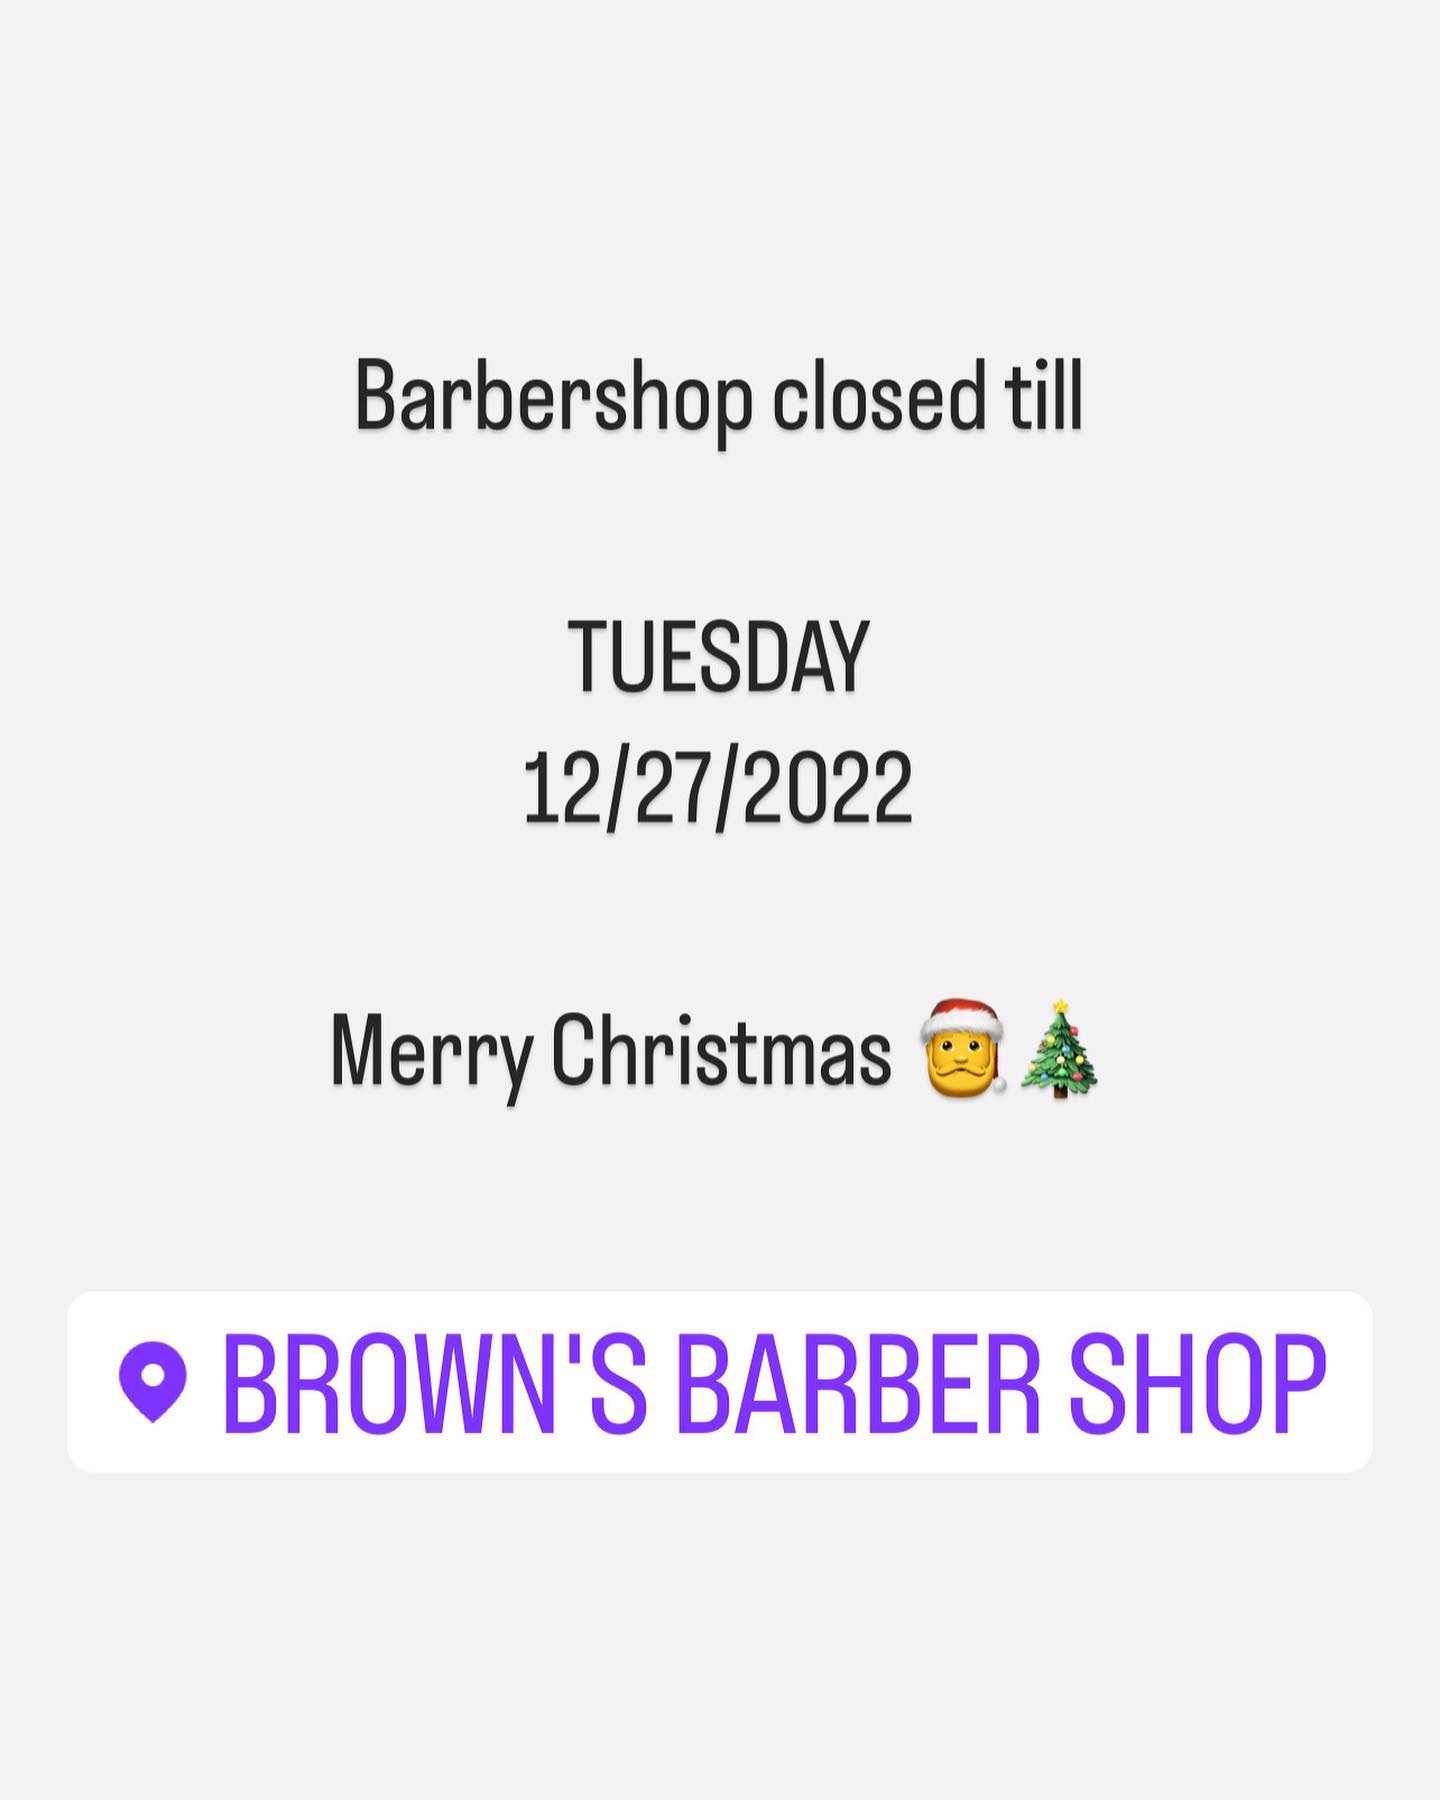 Brown's Barber Shop 305 N Church Ave, Mulberry Florida 33860